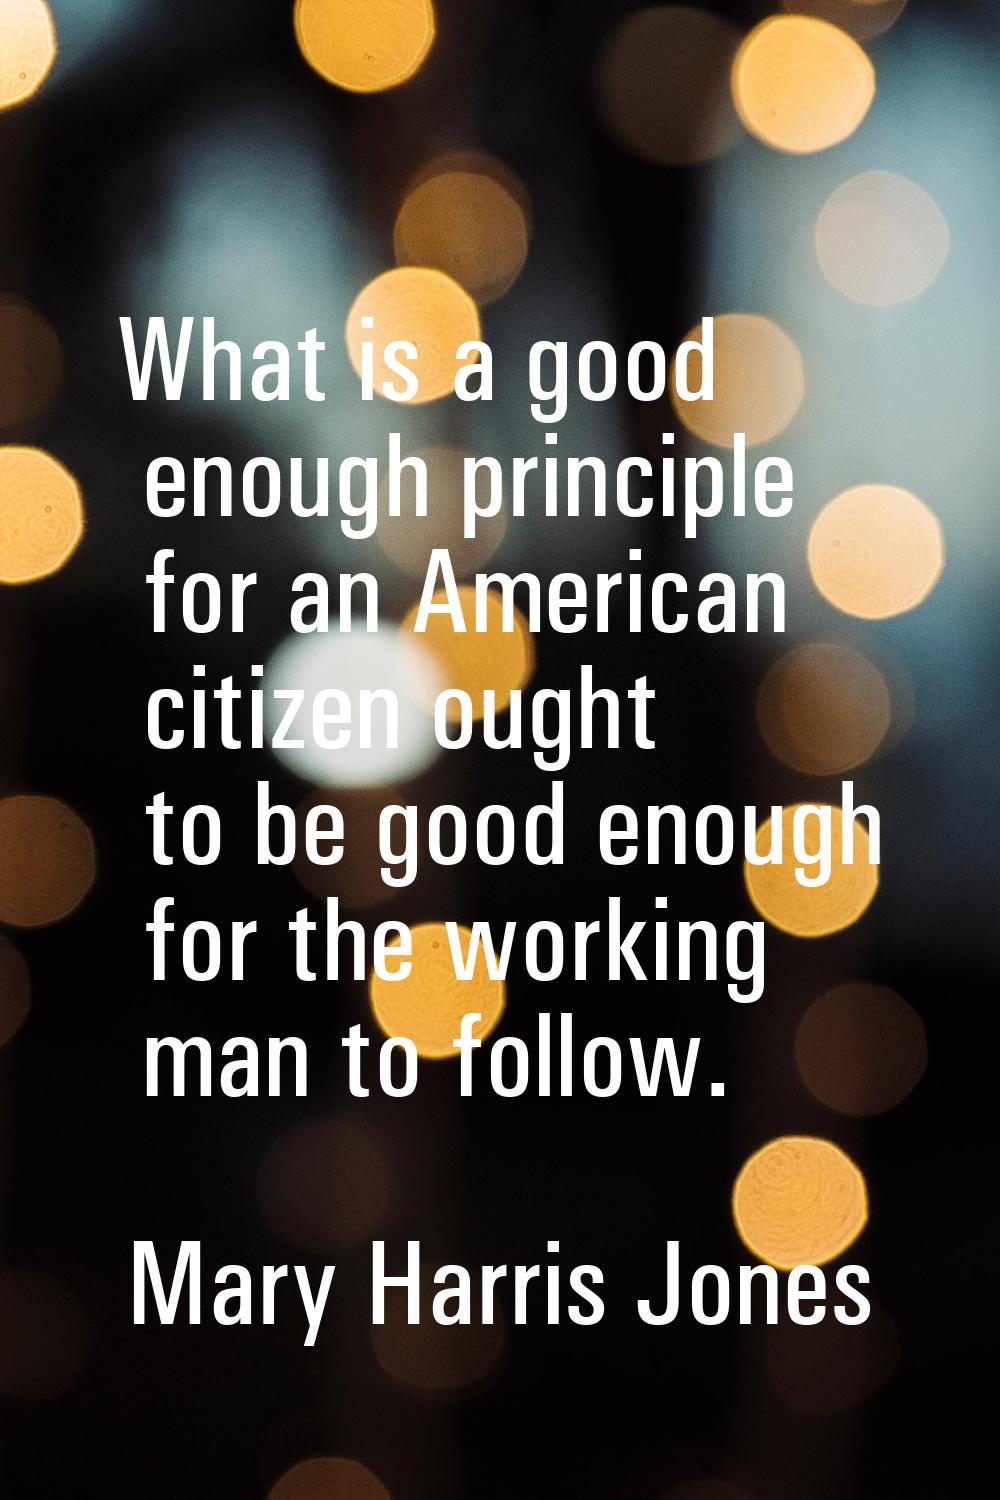 What is a good enough principle for an American citizen ought to be good enough for the working man